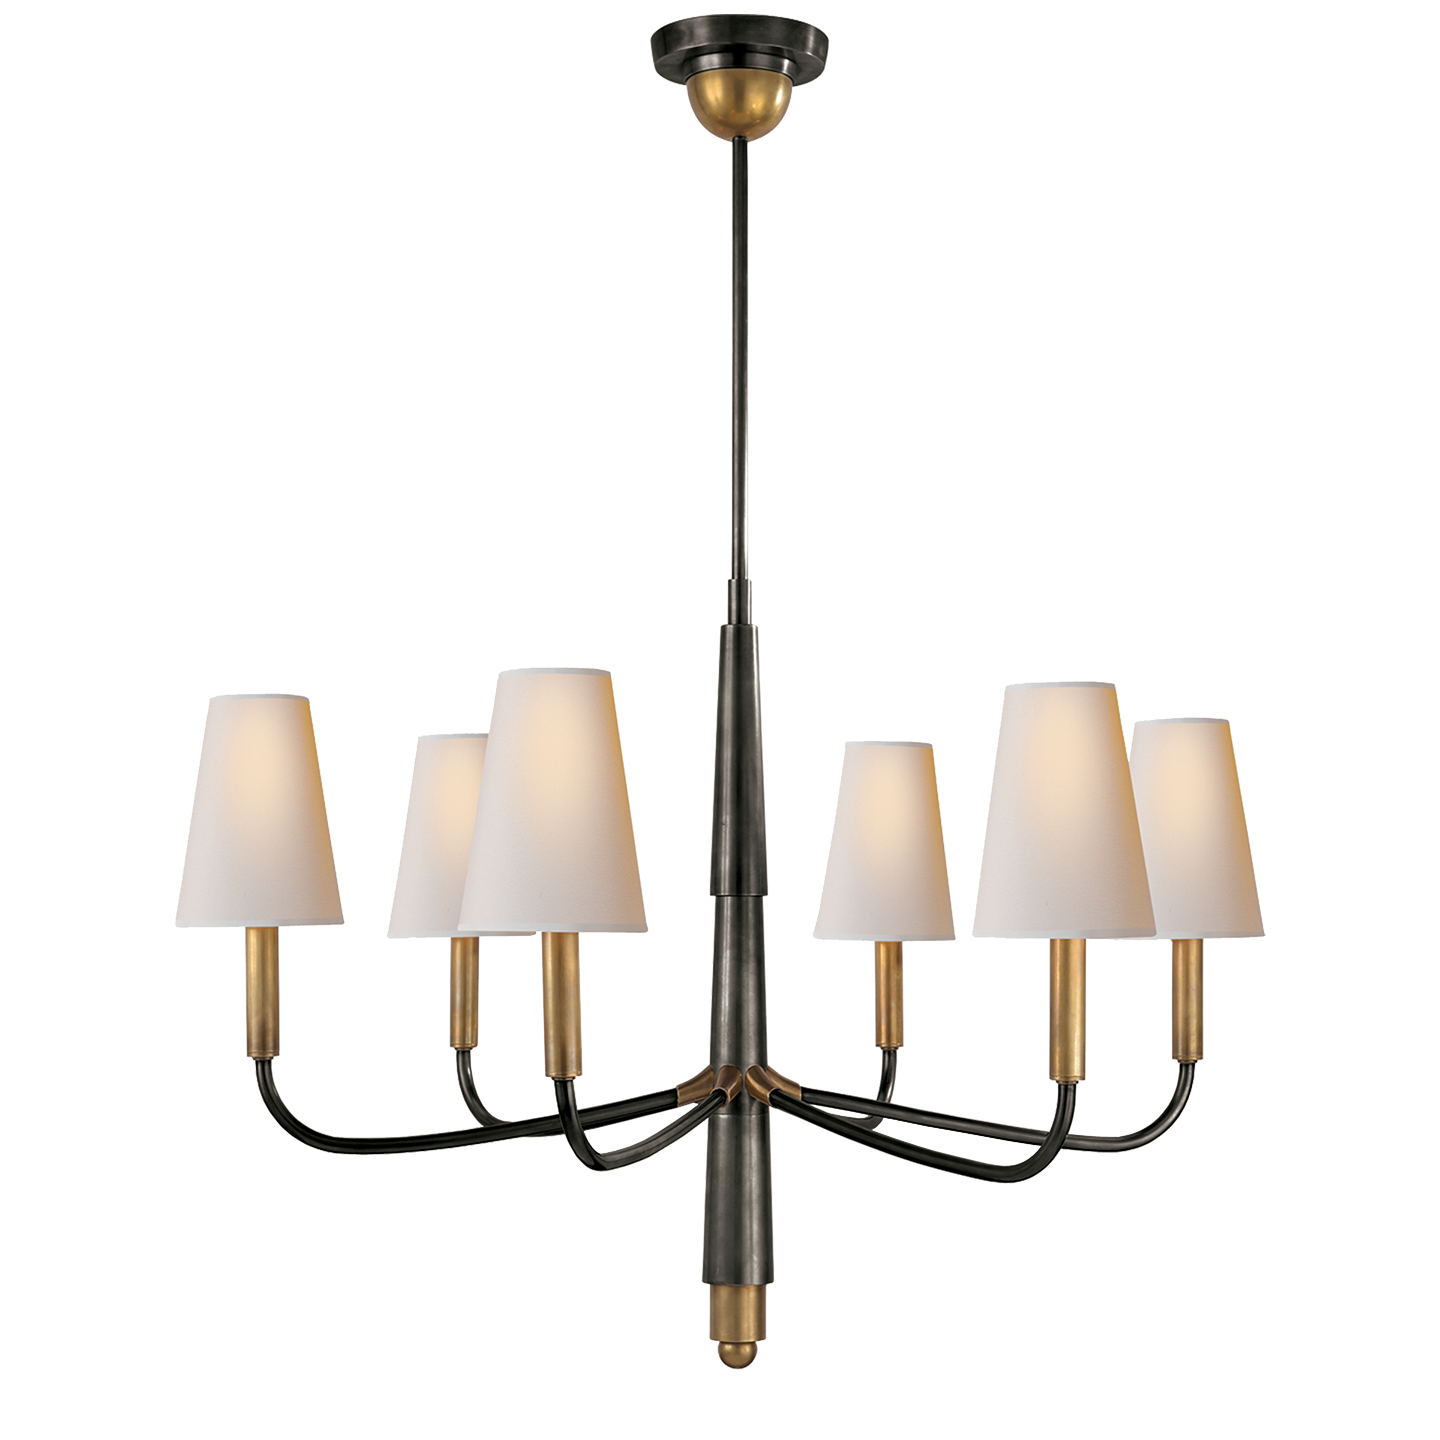  Visual Comfort offers something for every taste and has exceptional quality and timeless style. It’s my go-to lighting brand!